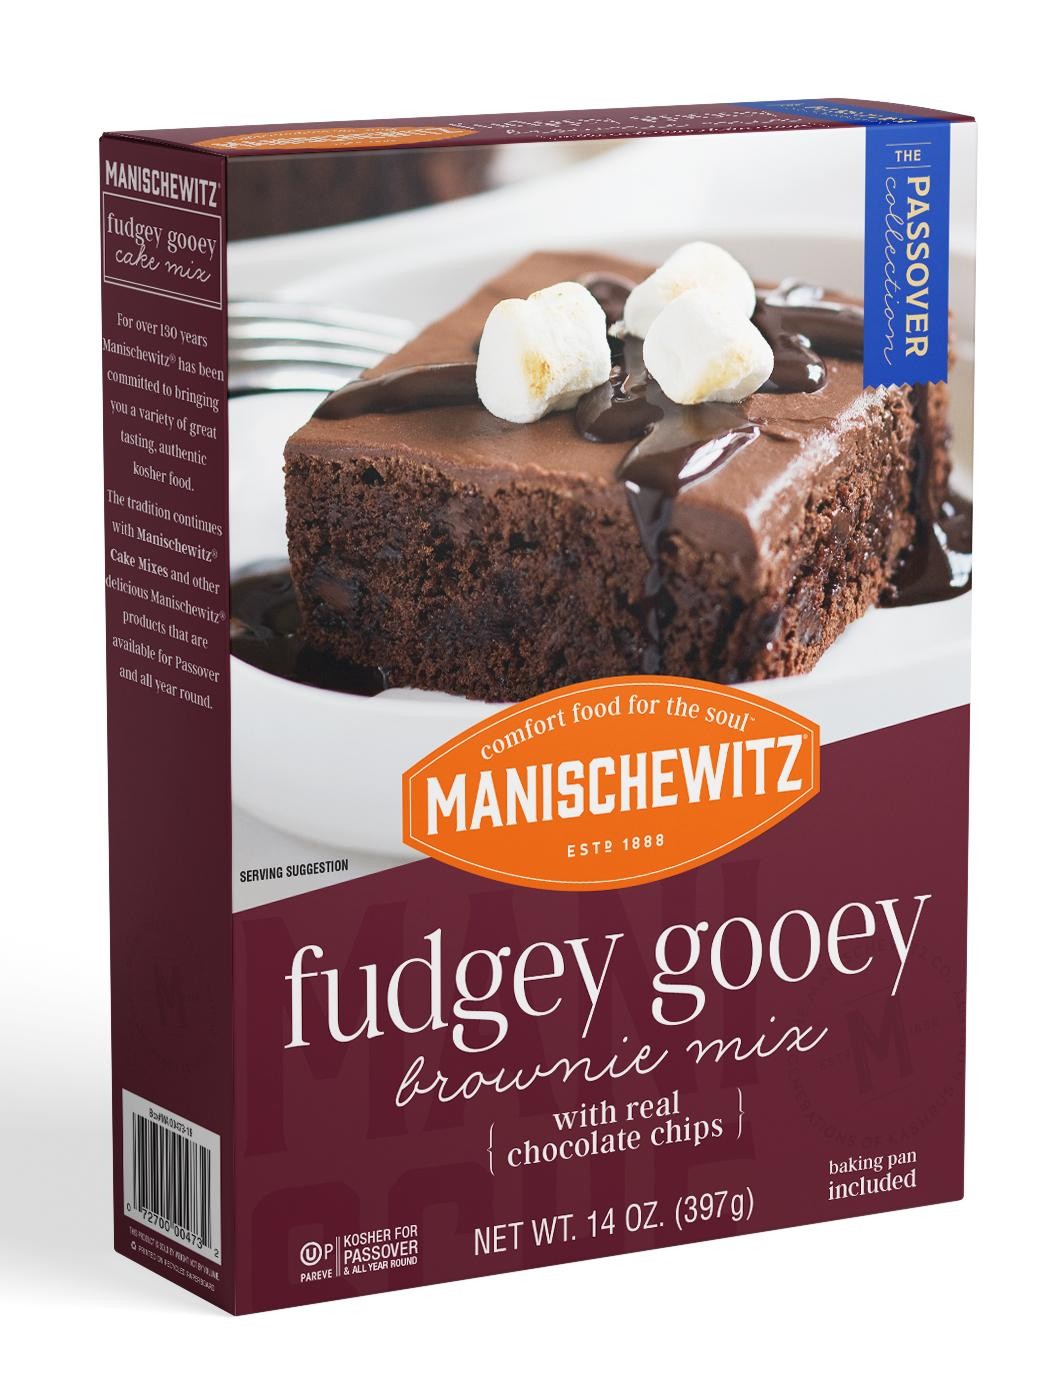 Fudgey Gooey Brownie Mix with Real Chocolate Chips